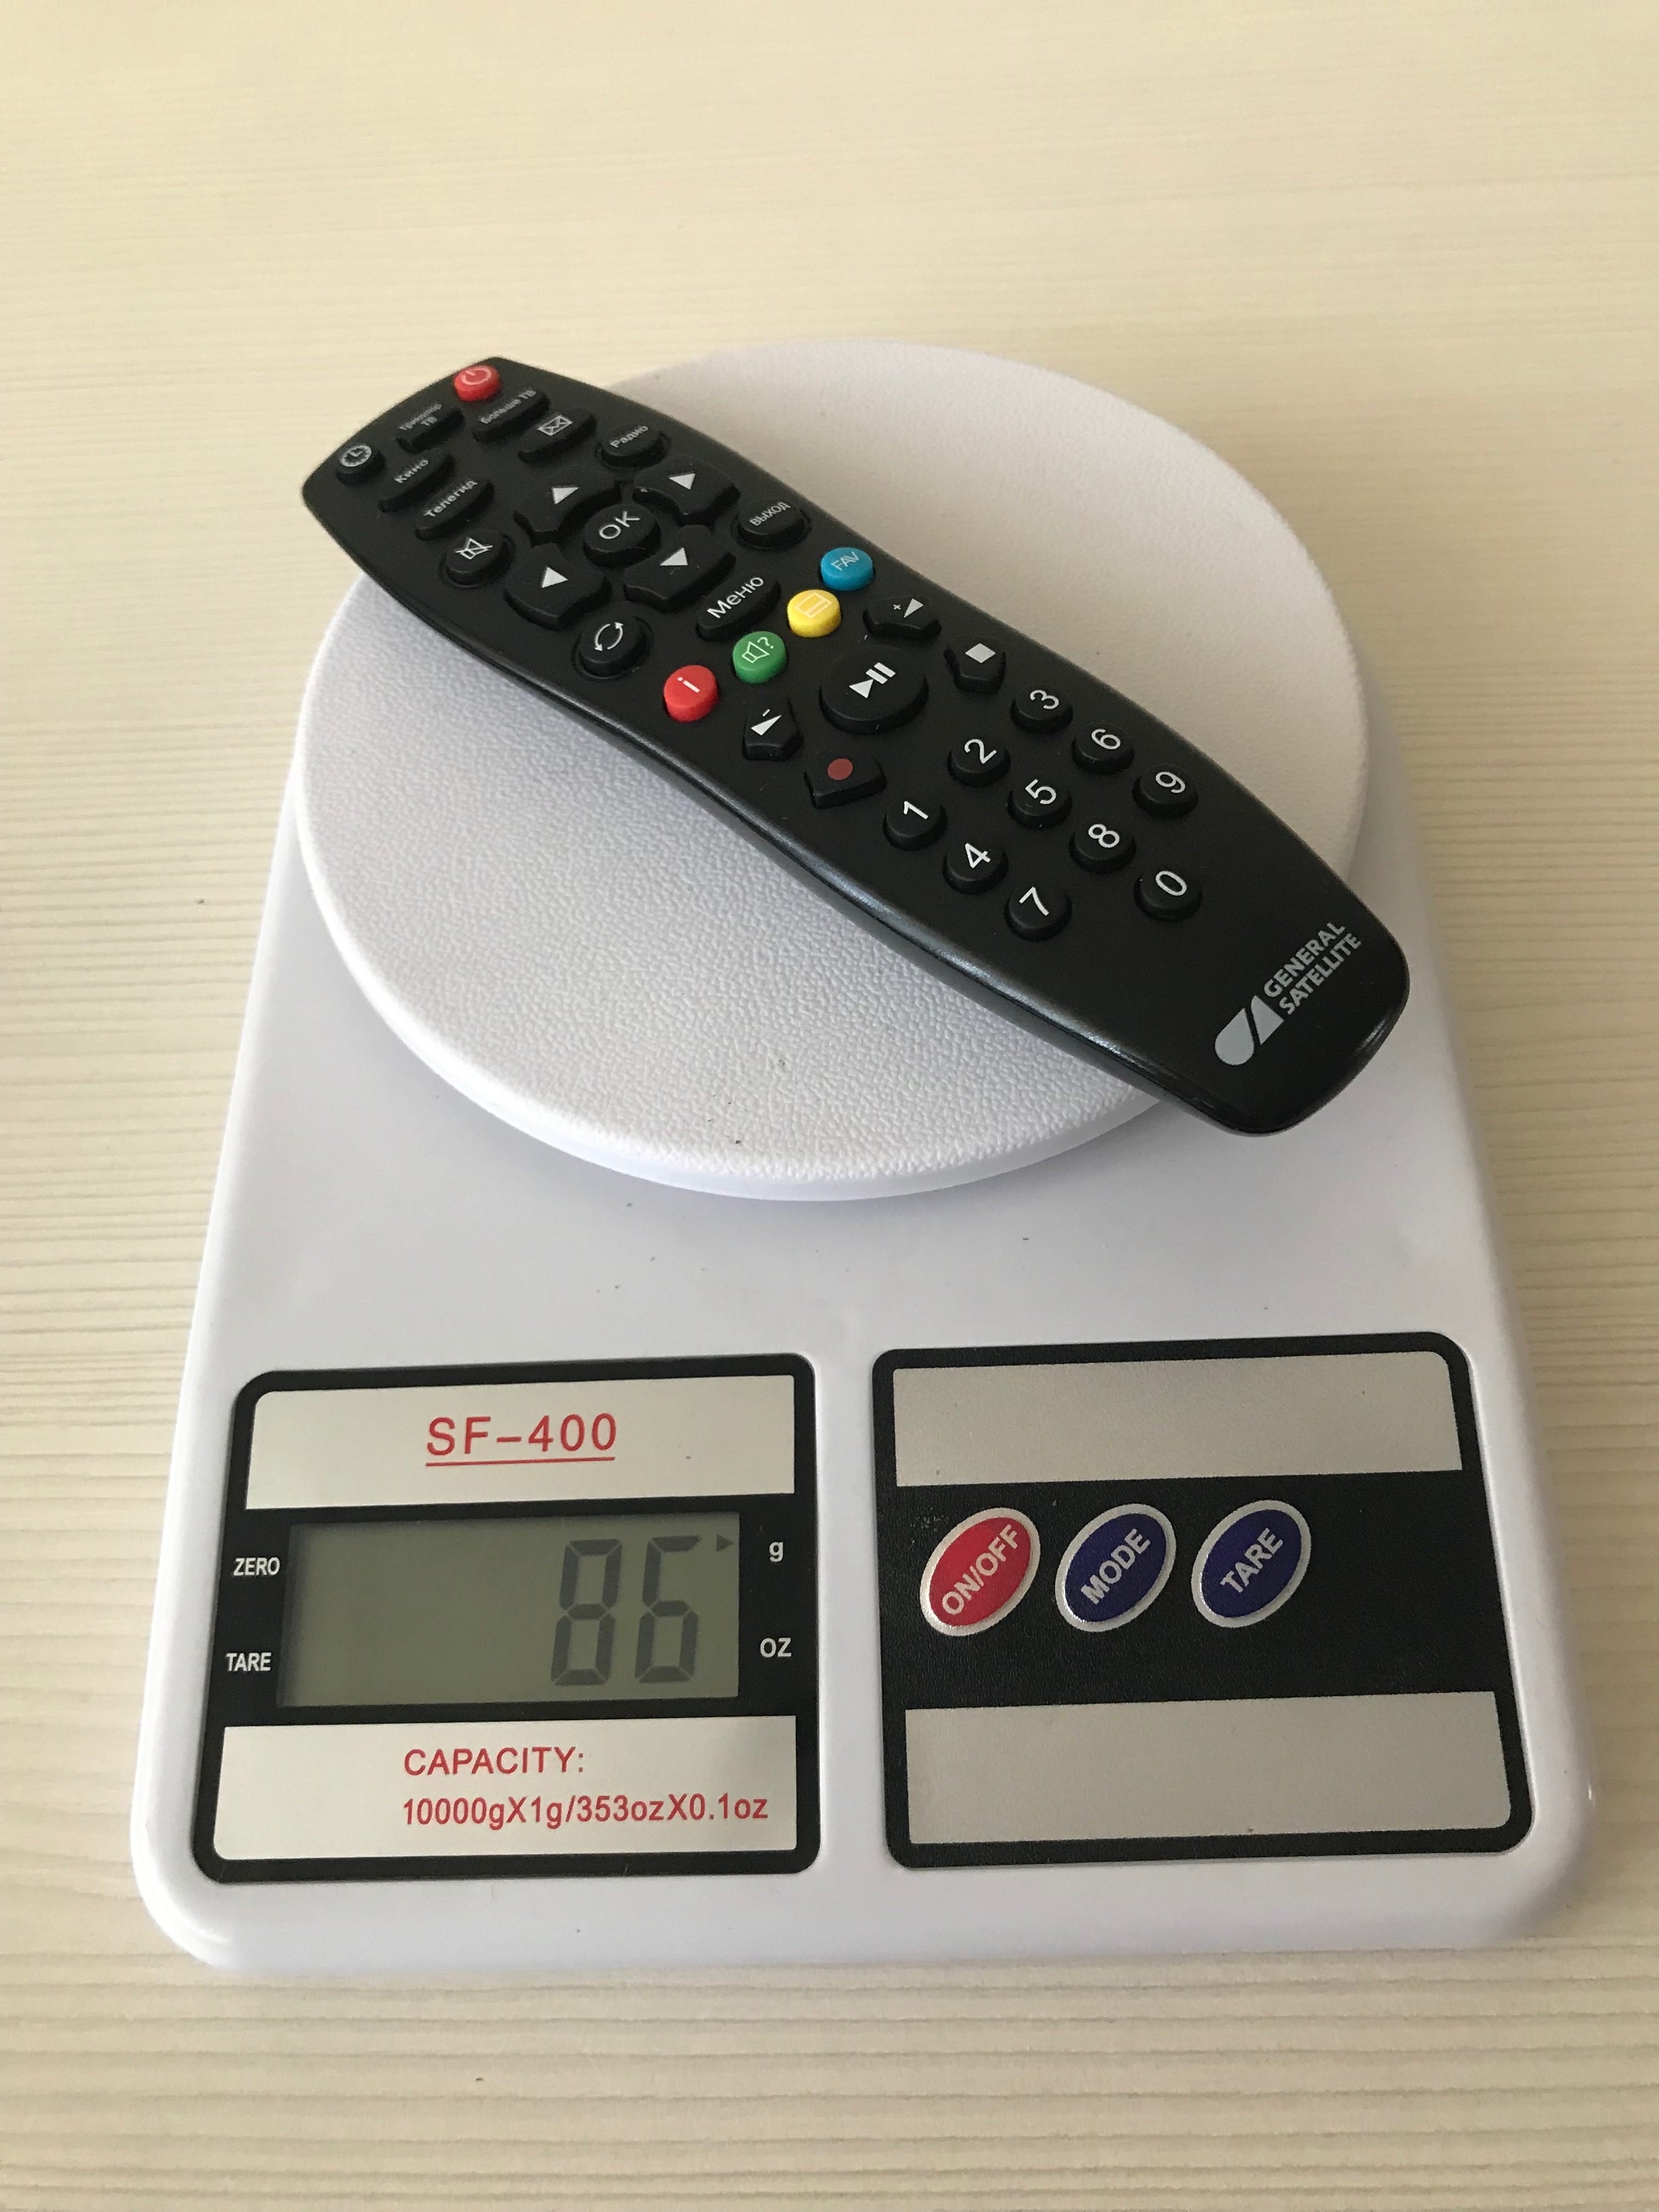 How much does the remote weigh?